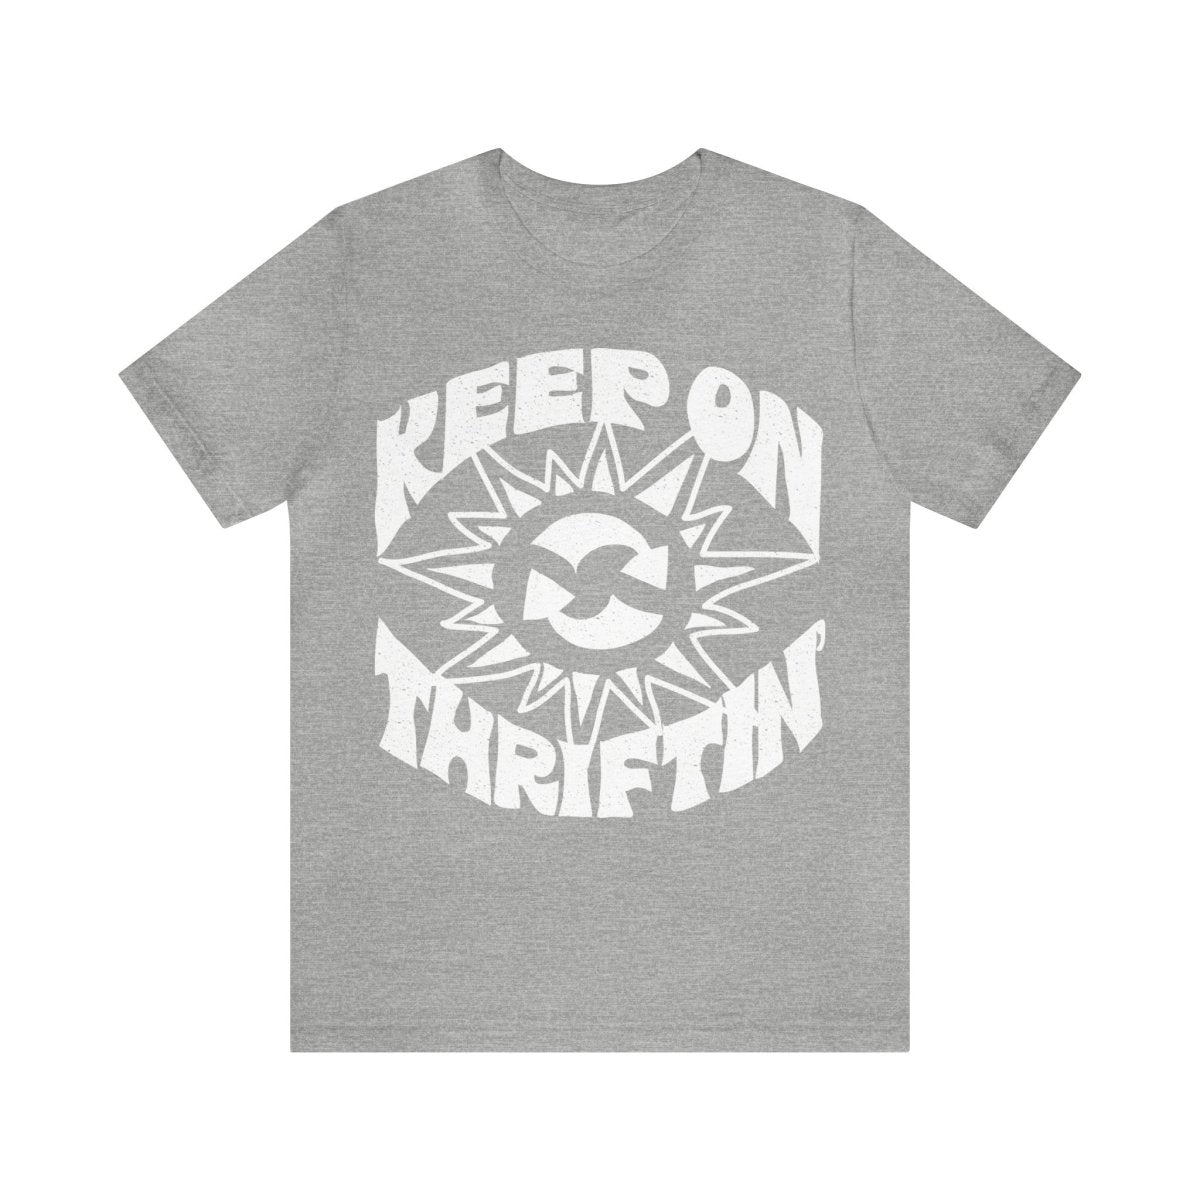 Keep On Thriftin' Premium T-Shirt, Thrift Stores, Home Made, Self Reliance, Reuse, Recycle, Upcycle, Junkin' Genius